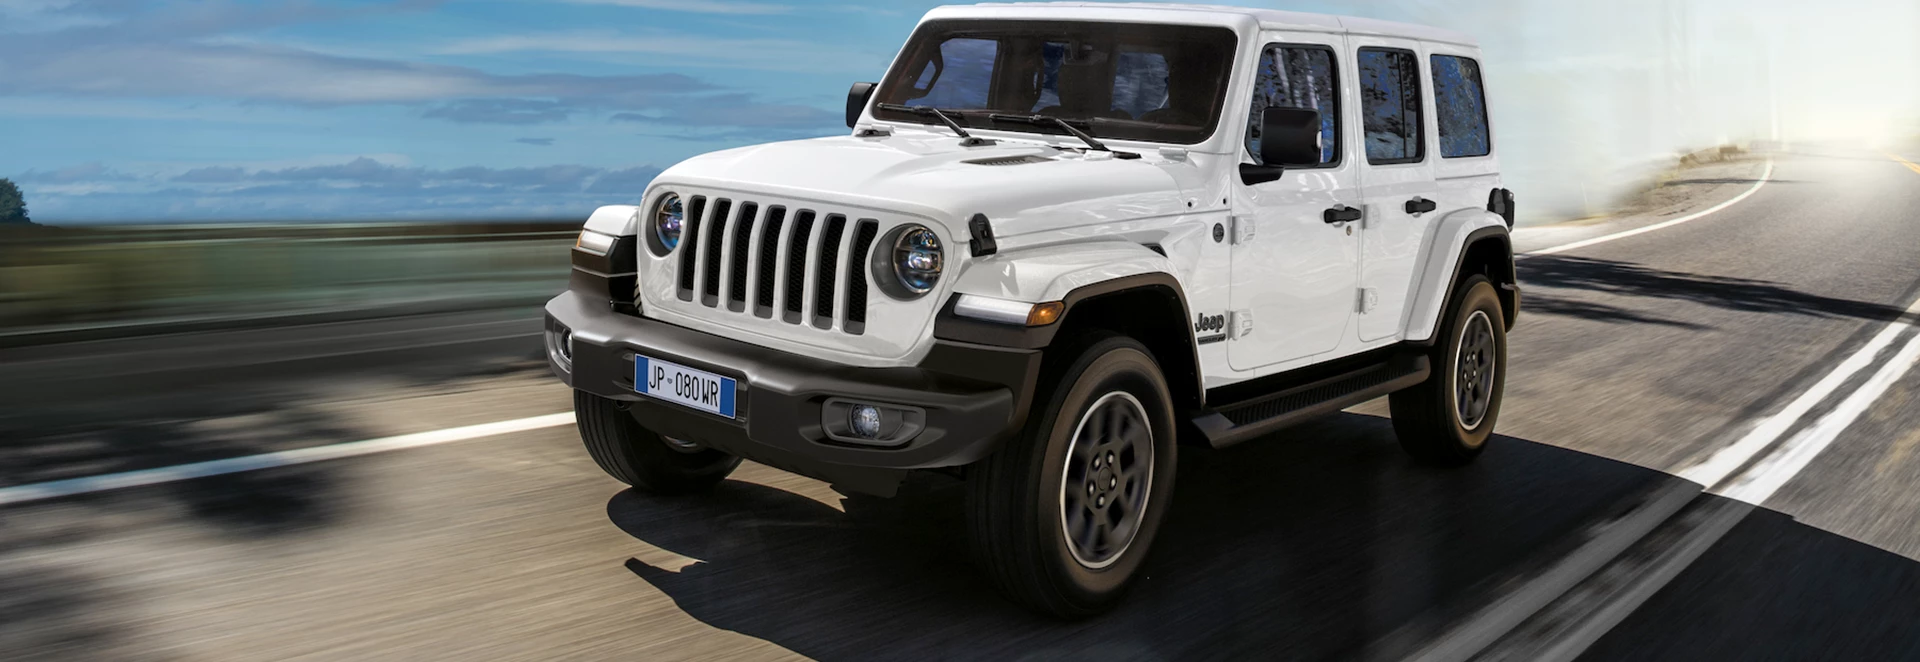 Jeep celebrates 80th birthday with new special editions 